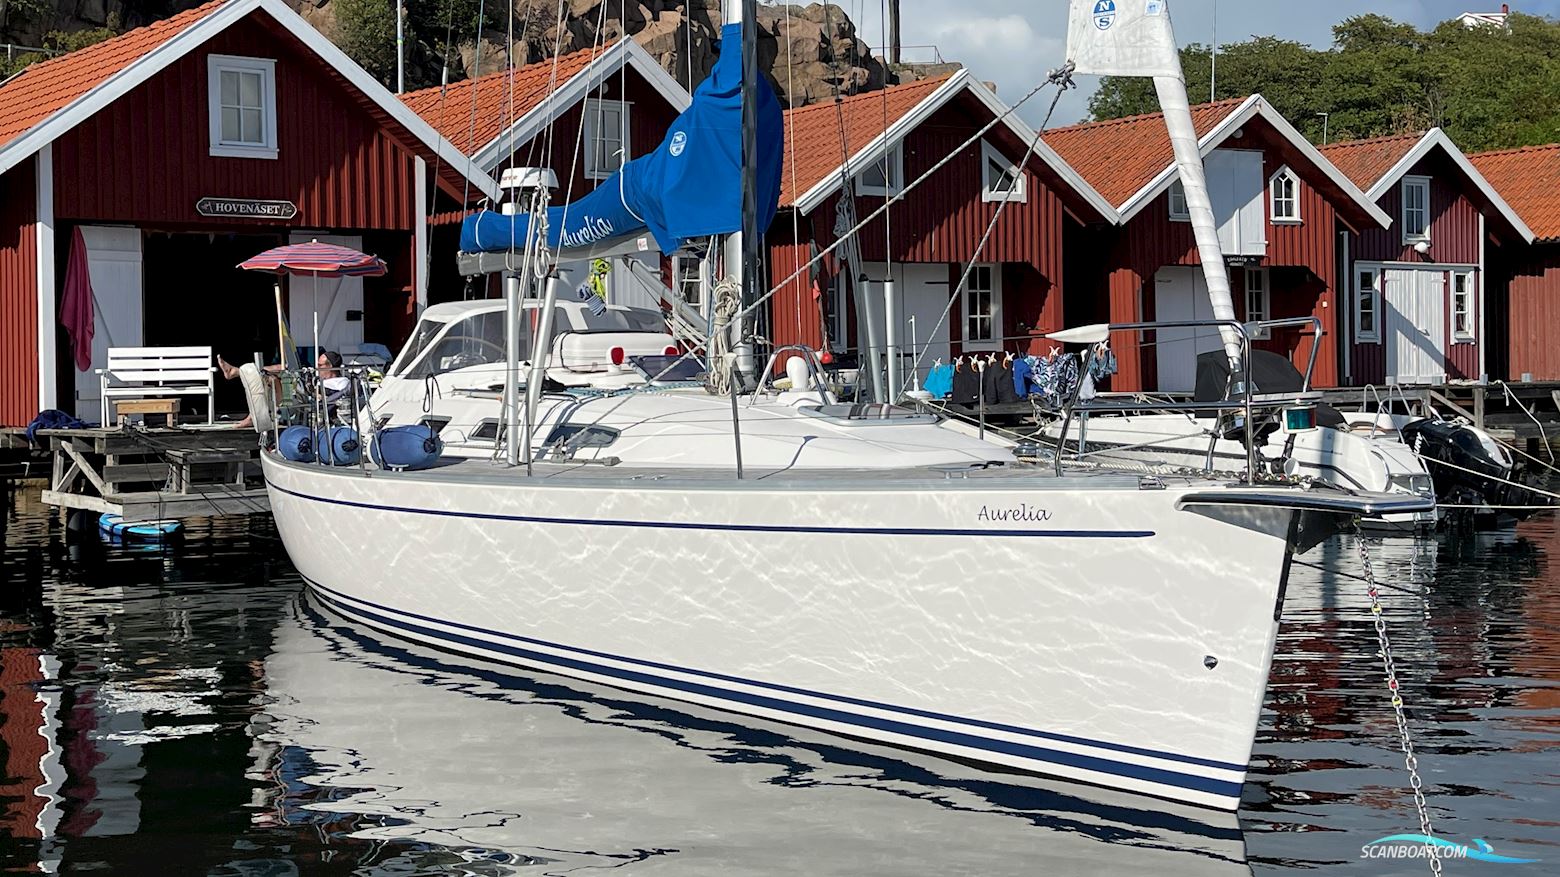 Finngulf 41 Sailing boat 2003, with Volvo Penta D2 - 55 engine, Sweden